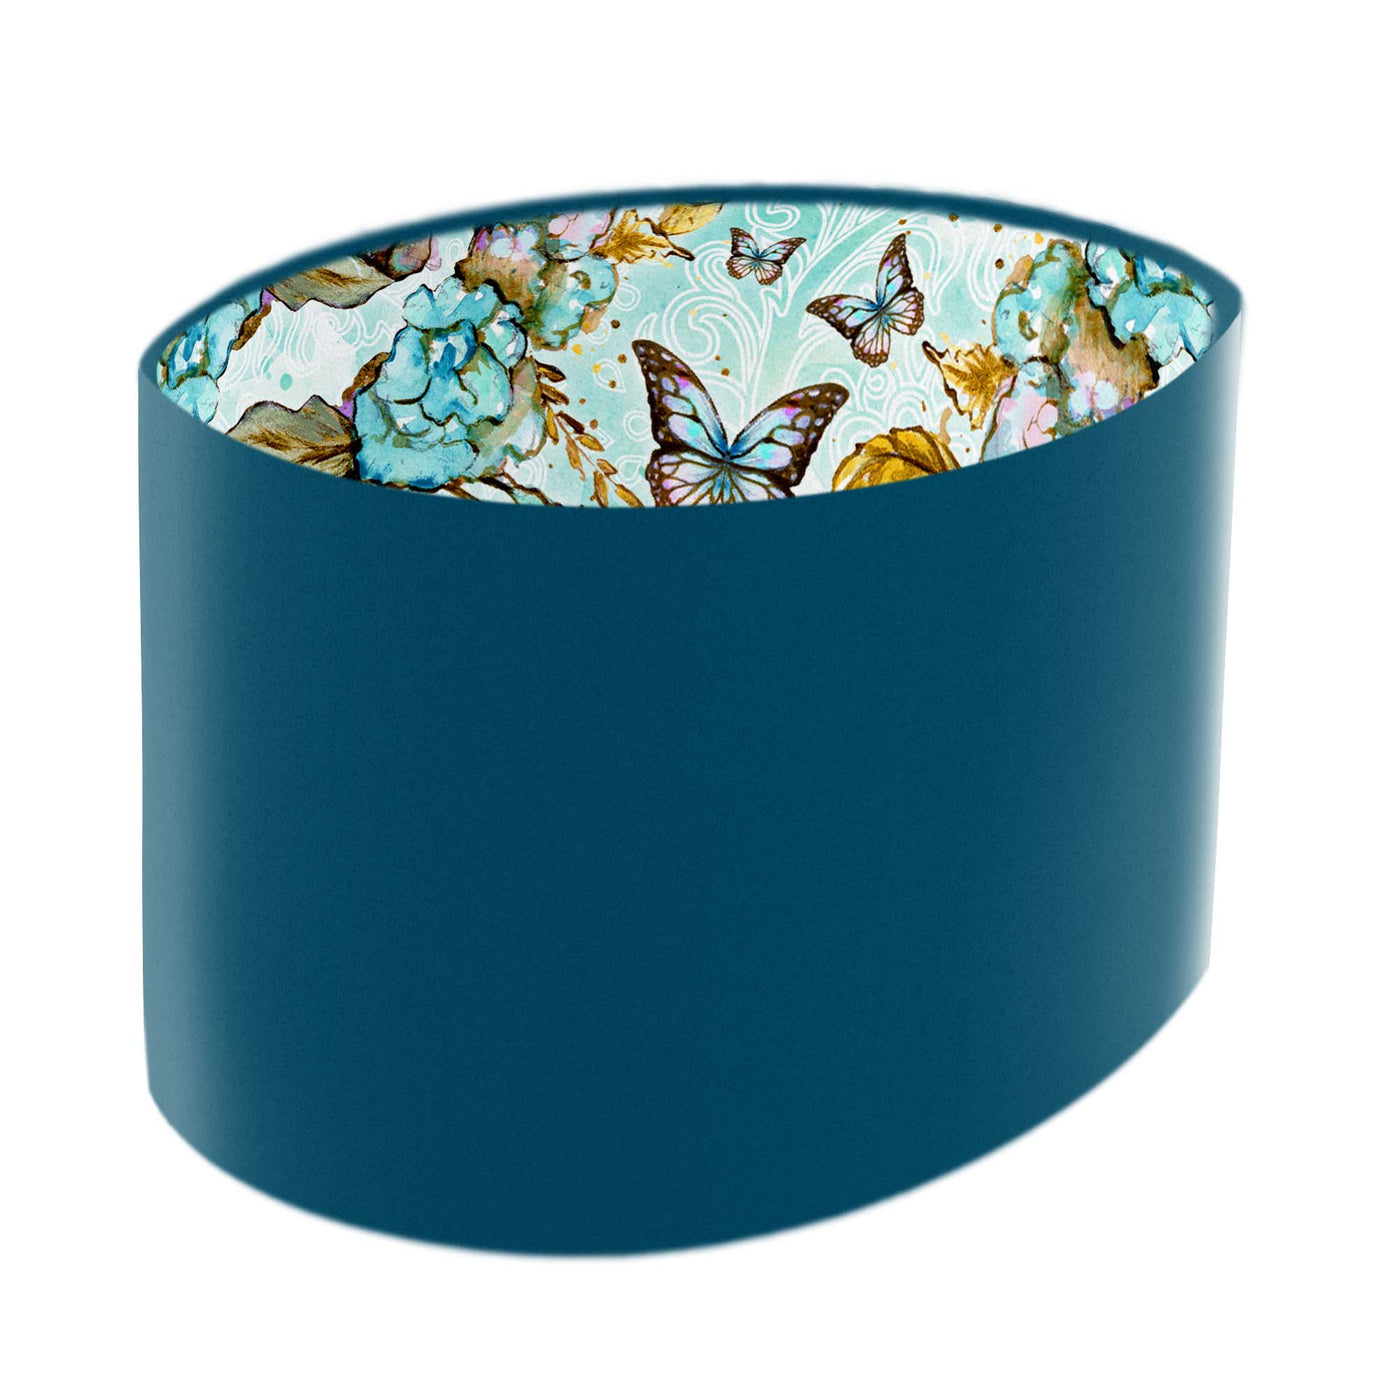 Boho Florals and Butterflies Oval Lampshade in Teal Blue Cotton